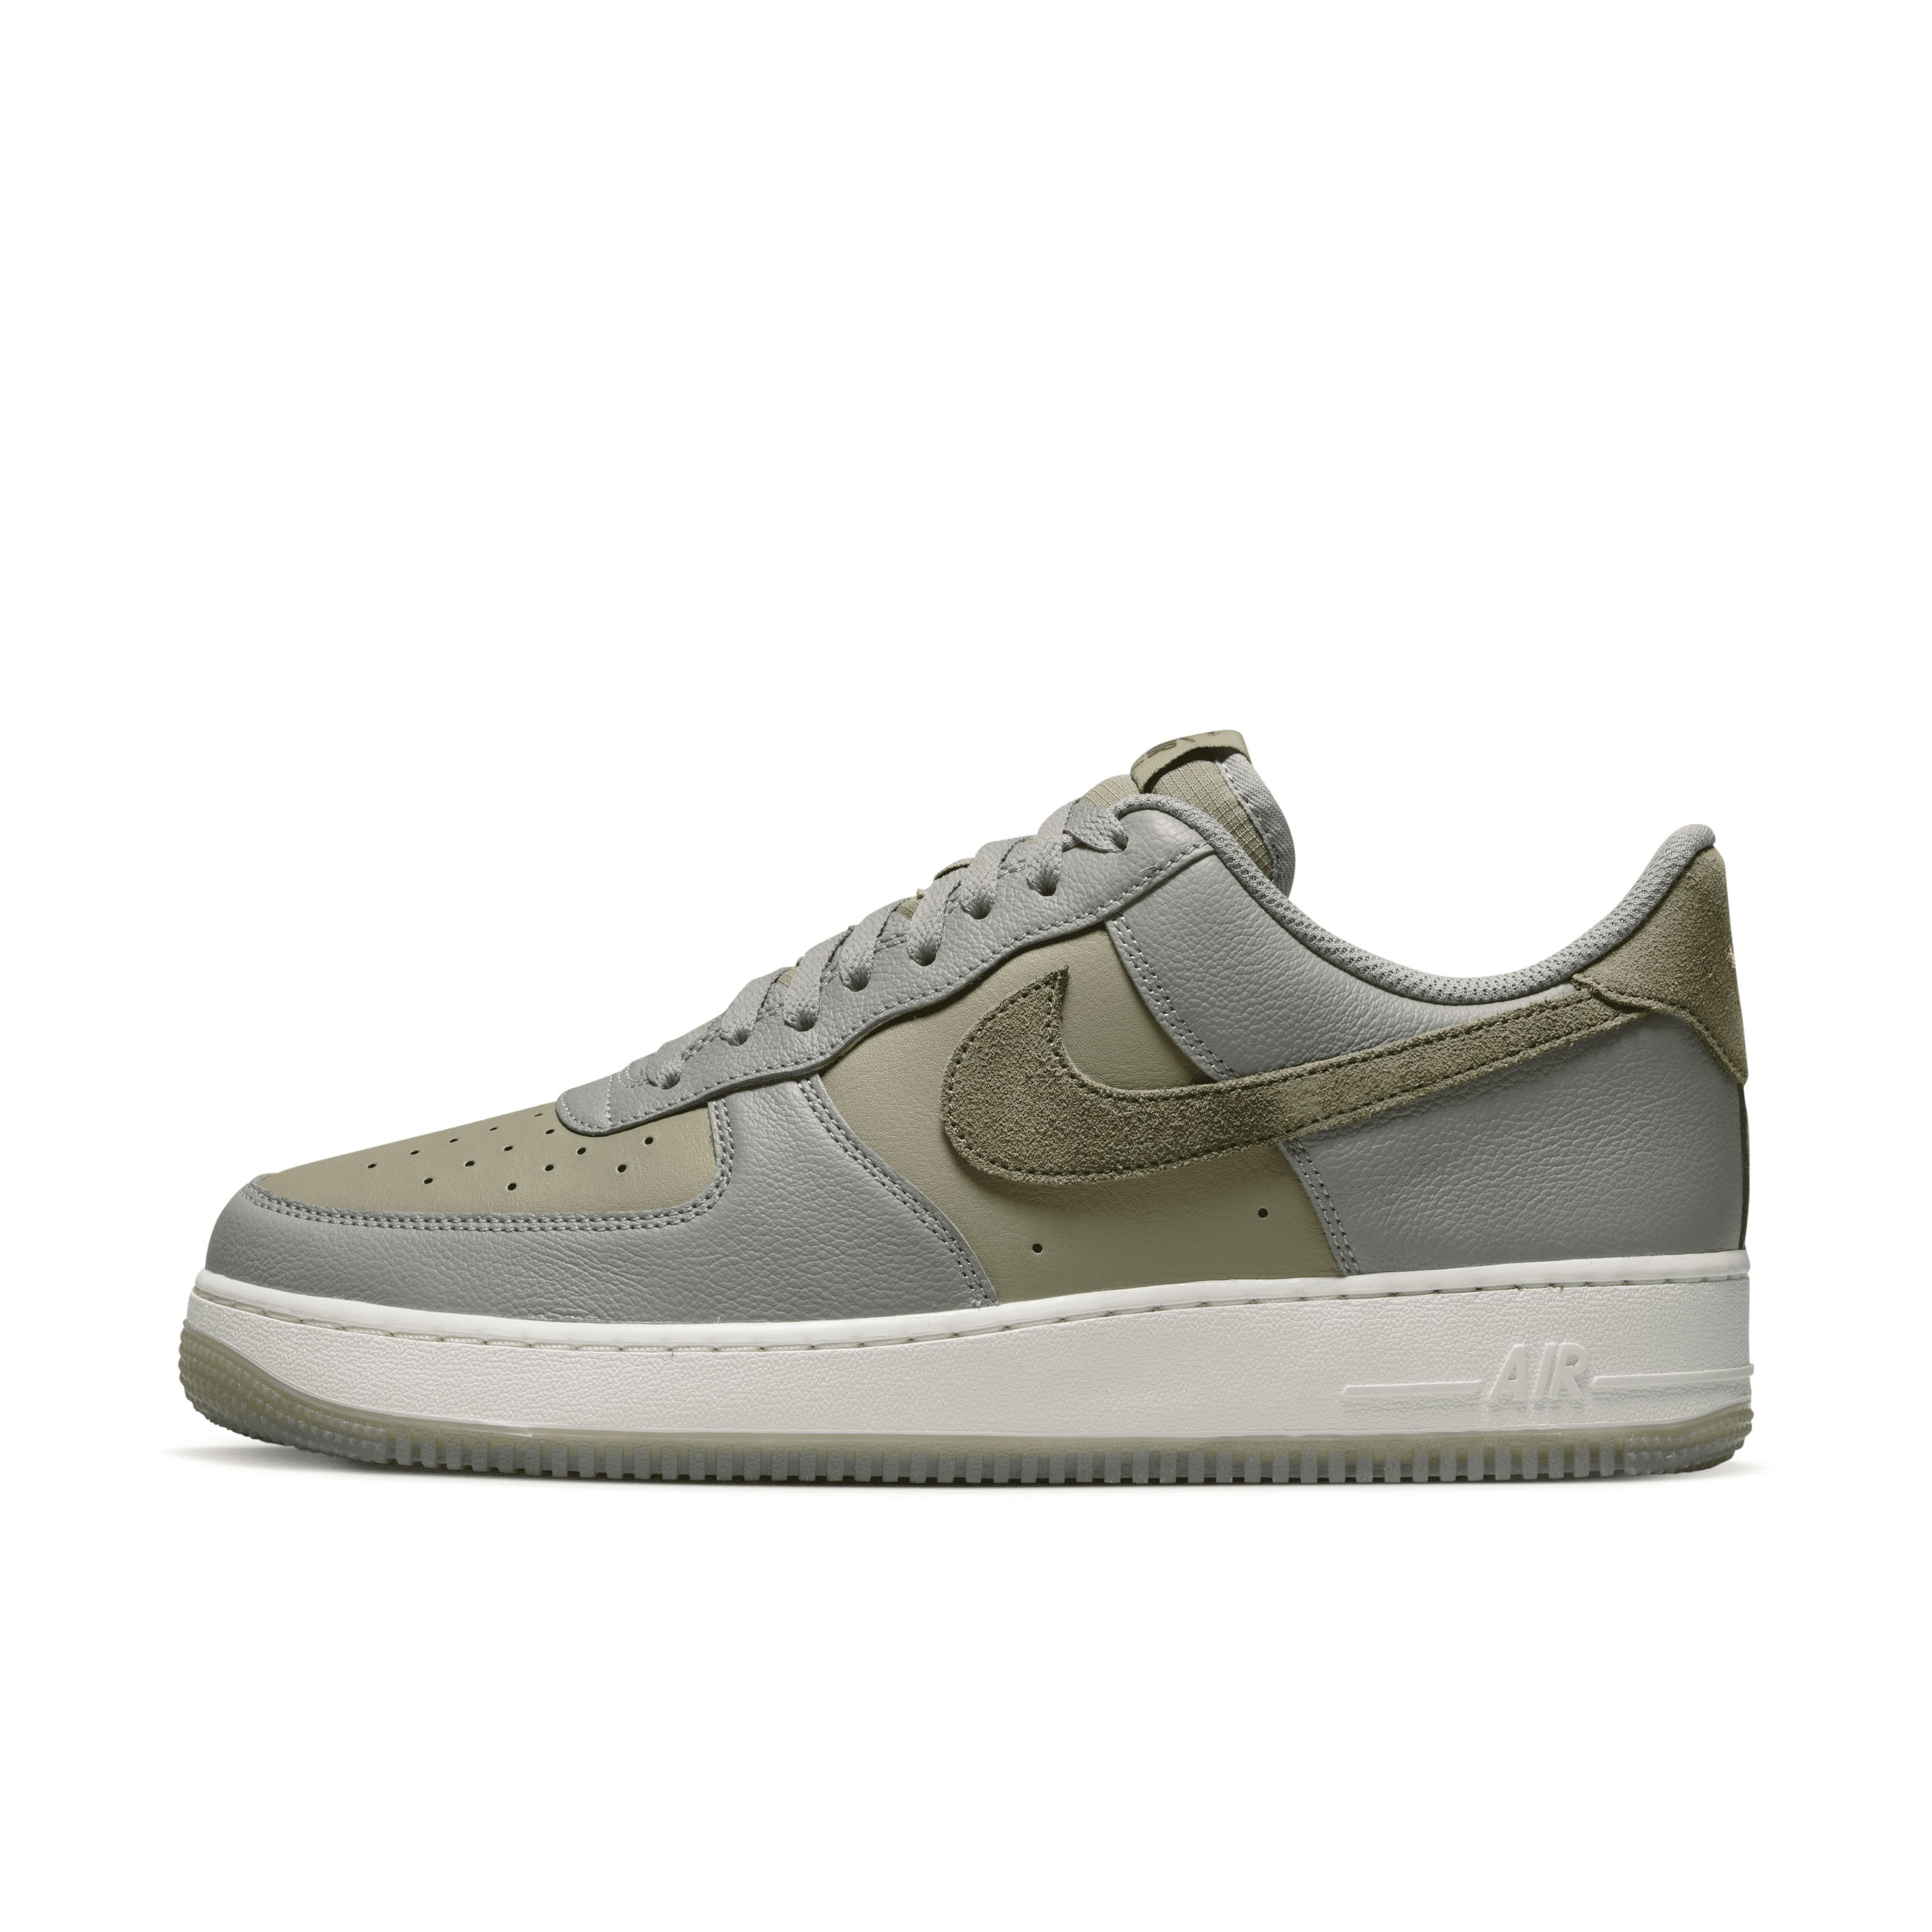 Nike Men's Air Force 1 '07 Lv8 Shoes In Dark Stucco/medium Olive/neutral Olive